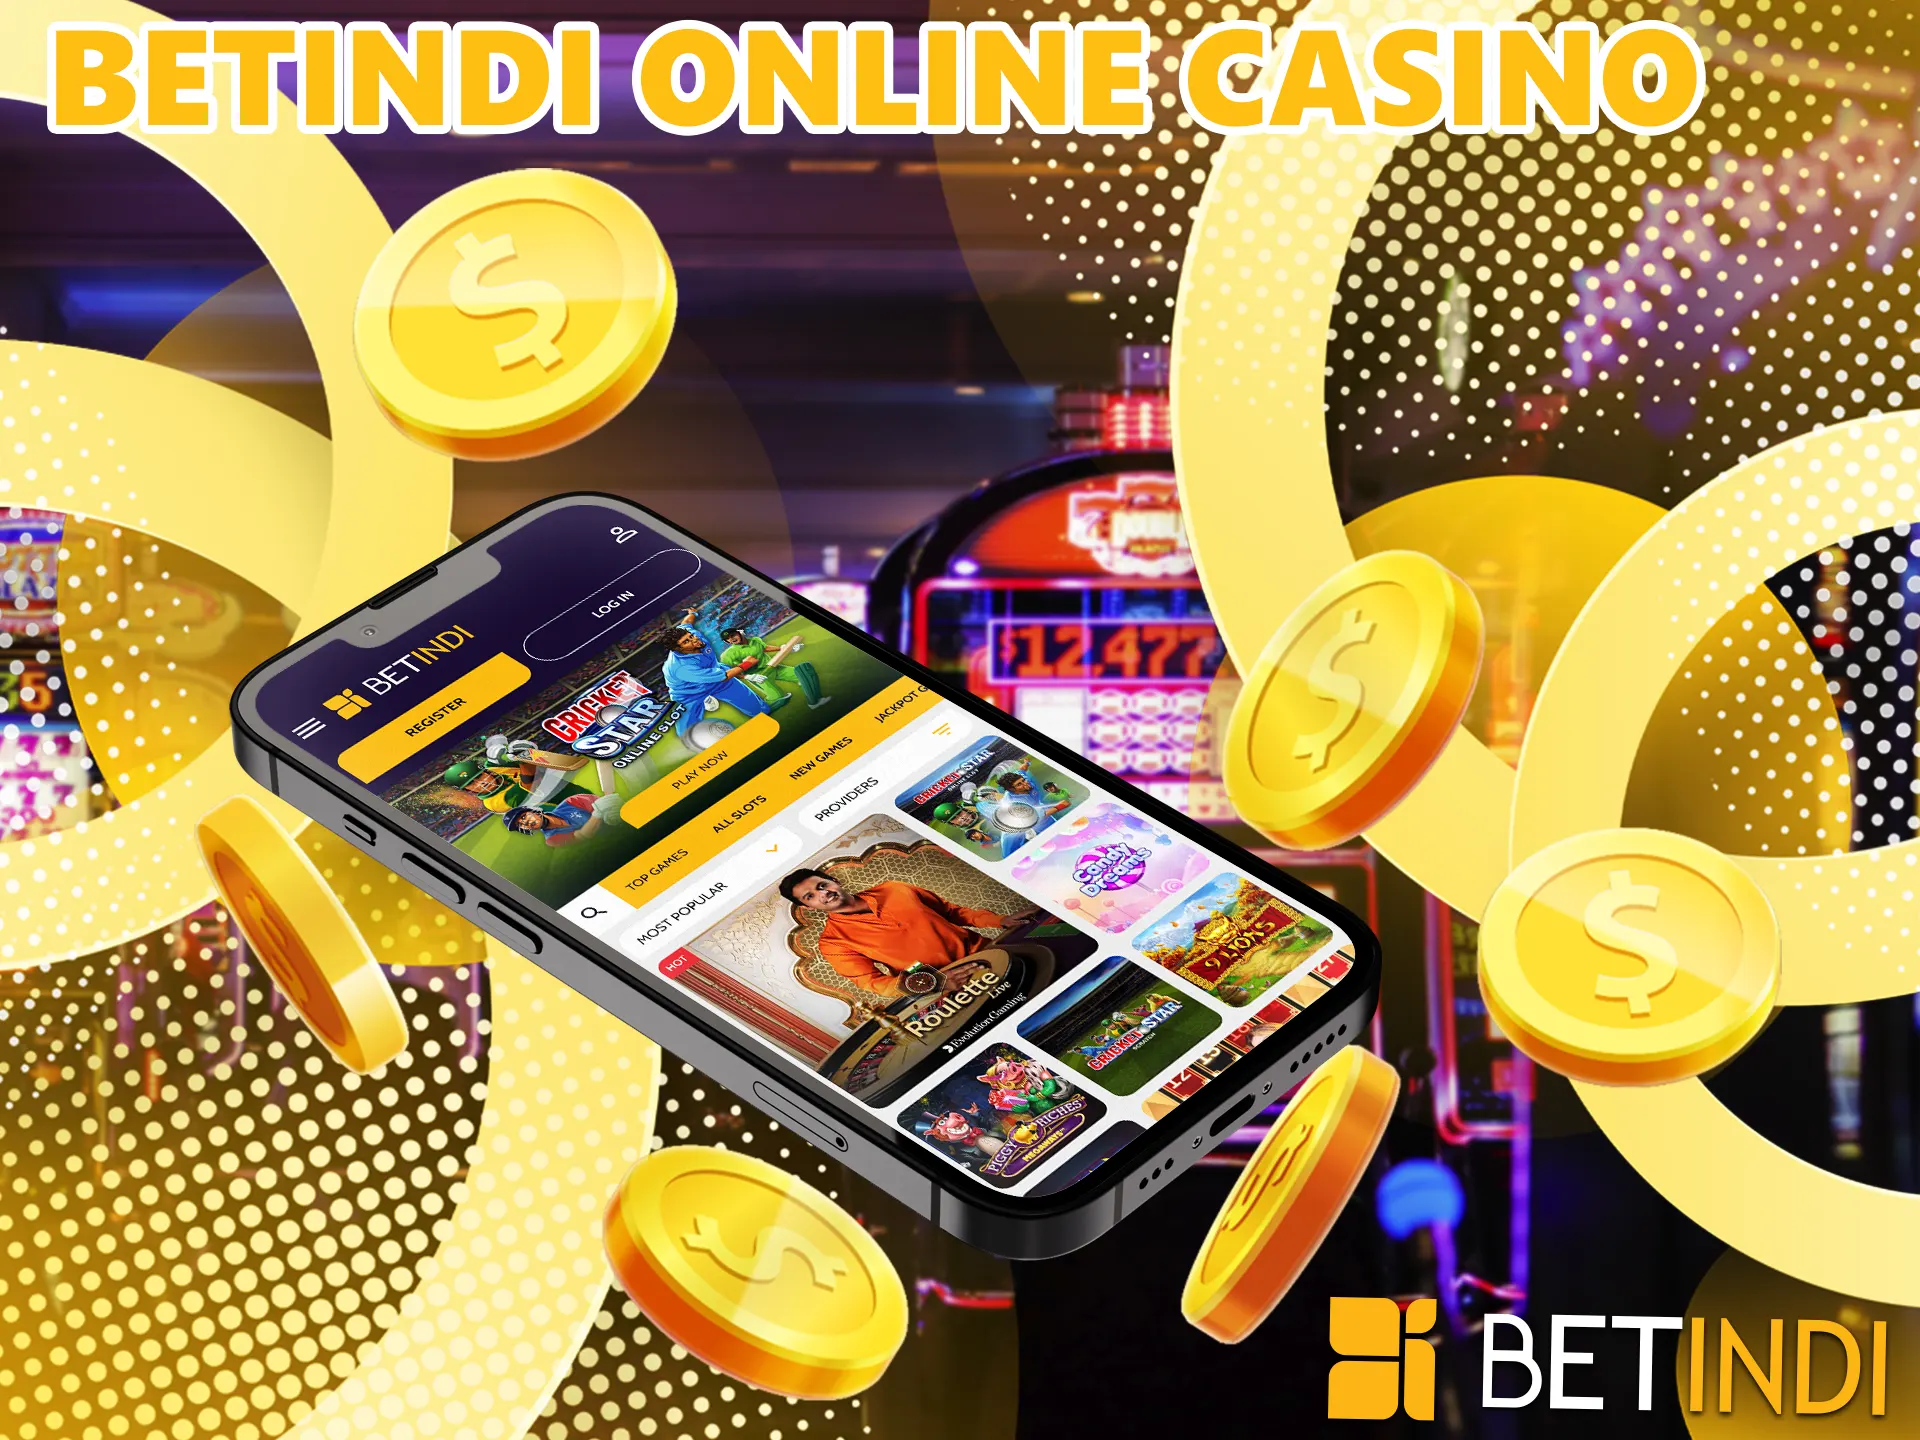 Players here can not only make bets, but also full play gambling, available classic for beginners, live-casino with a live dealer.